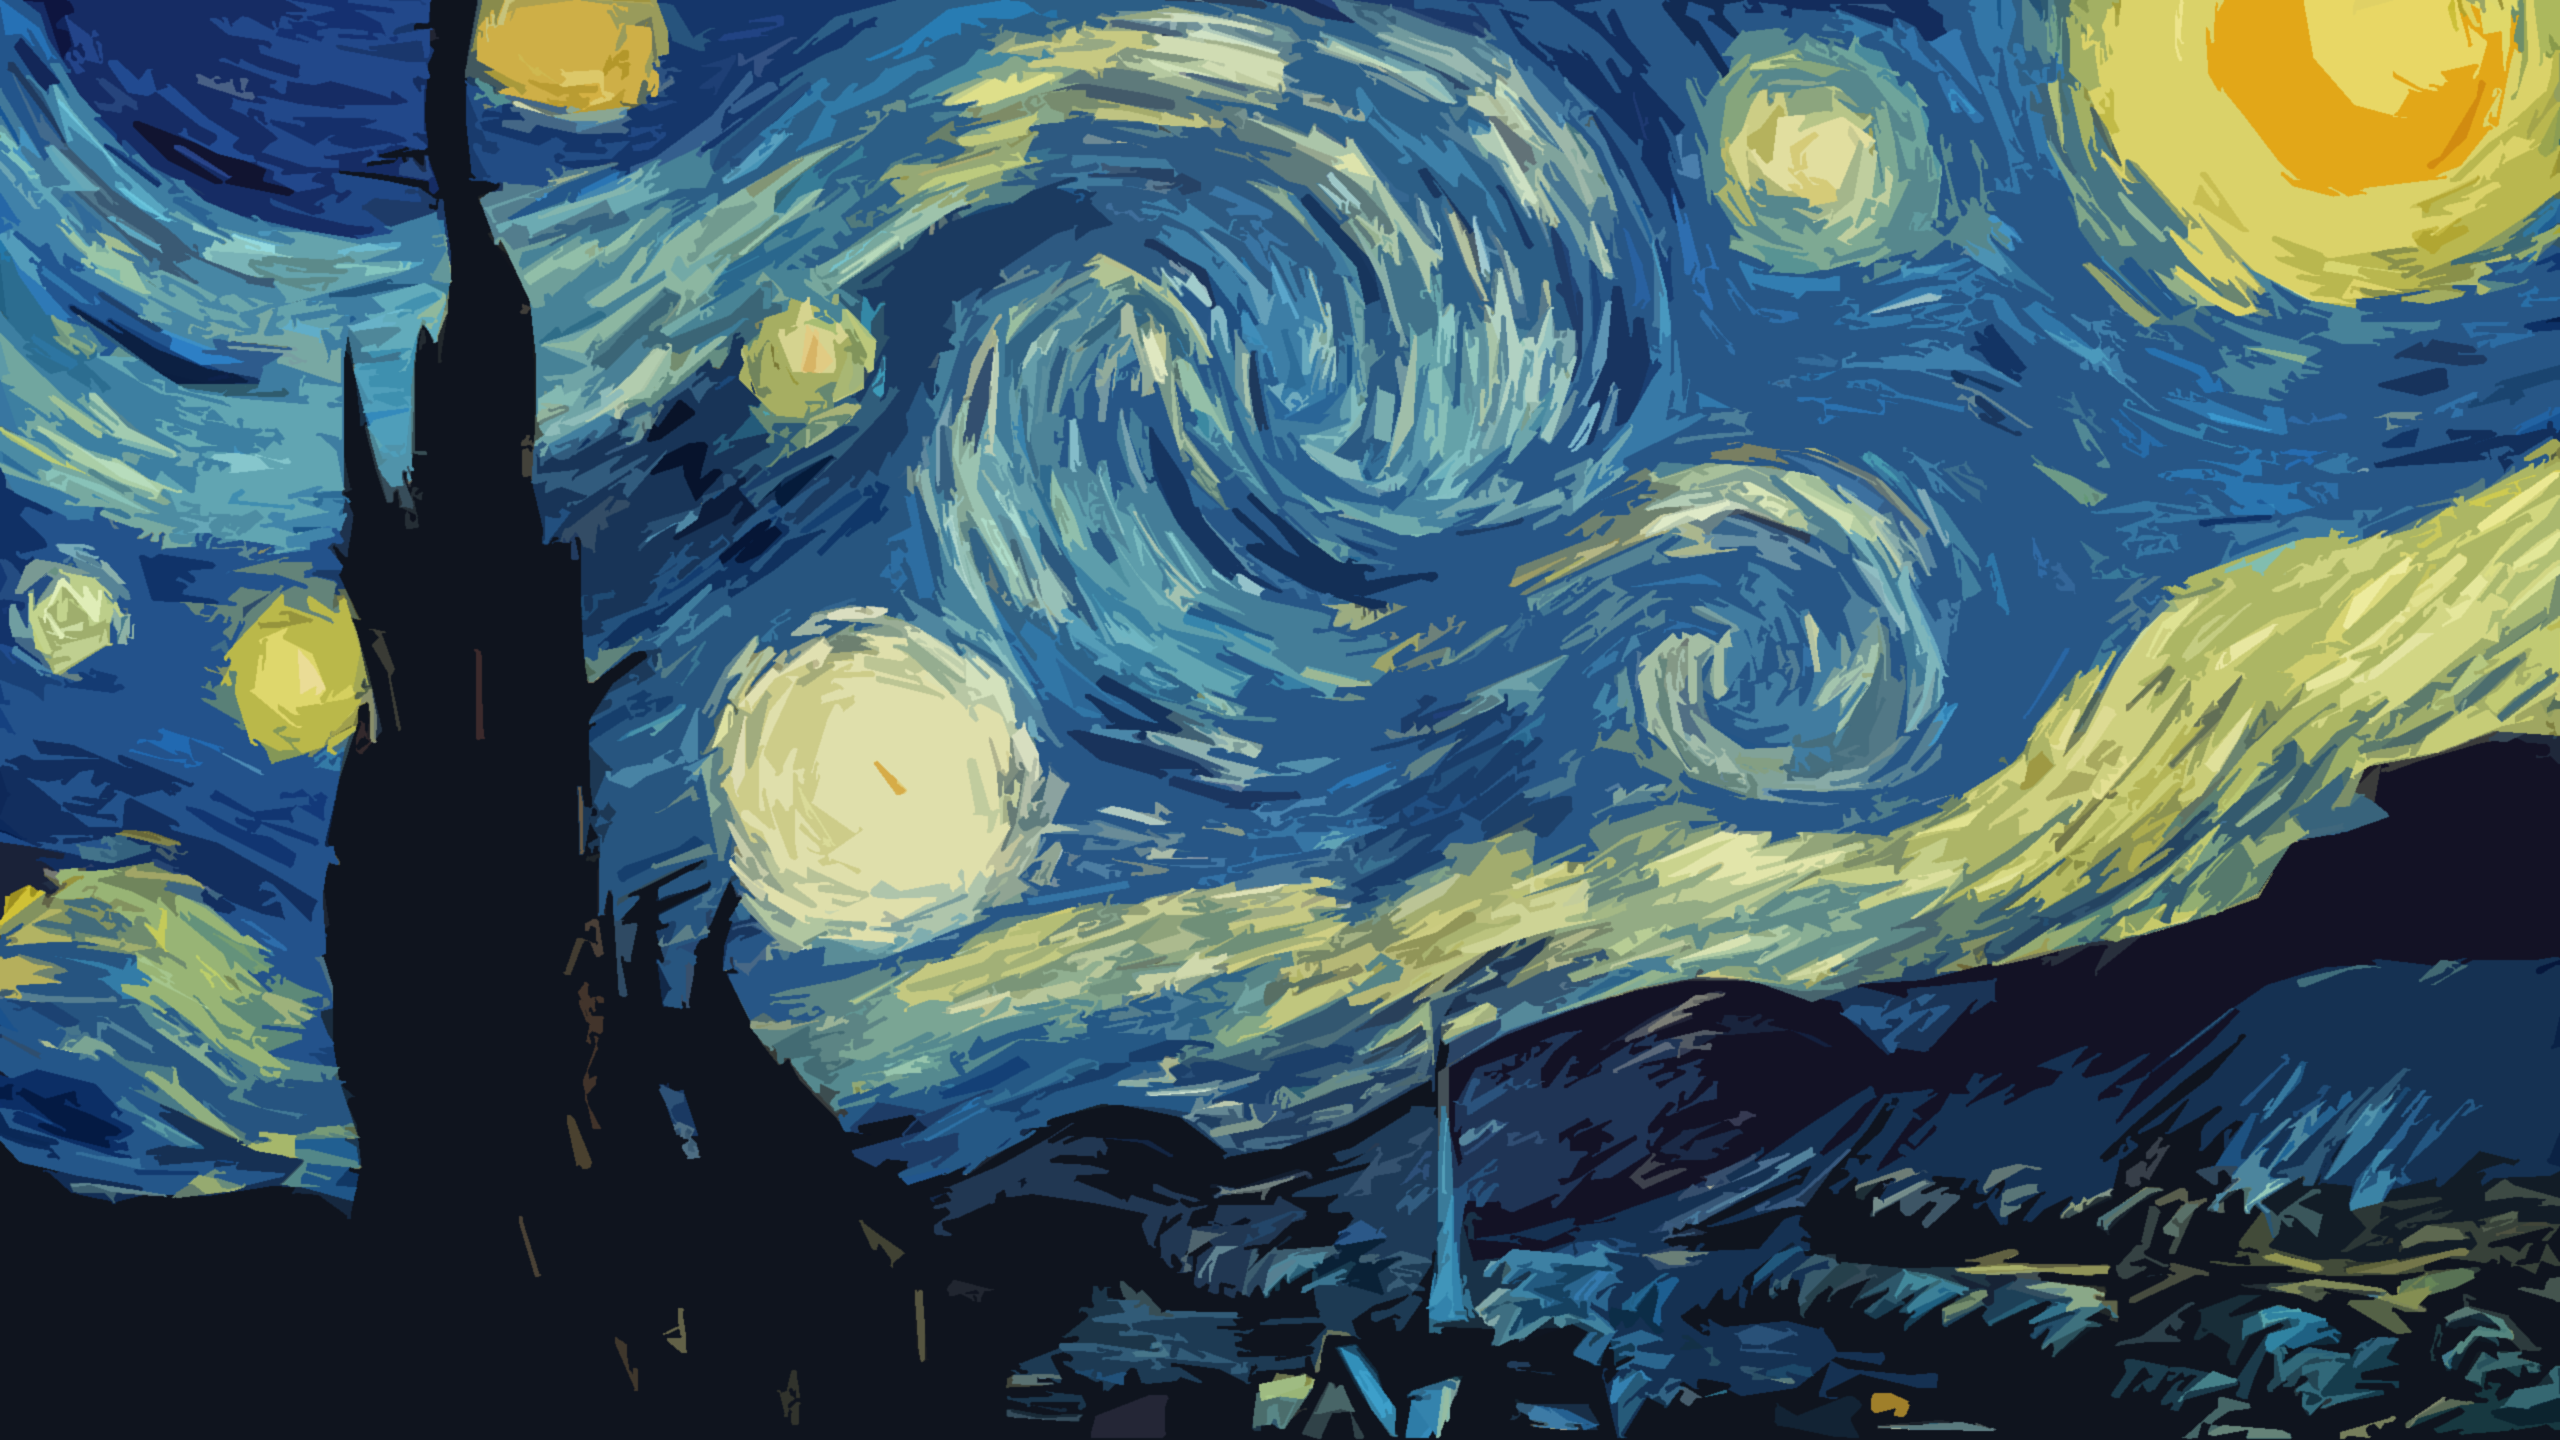 Painting Vincent Van Gogh Abstract The Starry Night 2560x1440